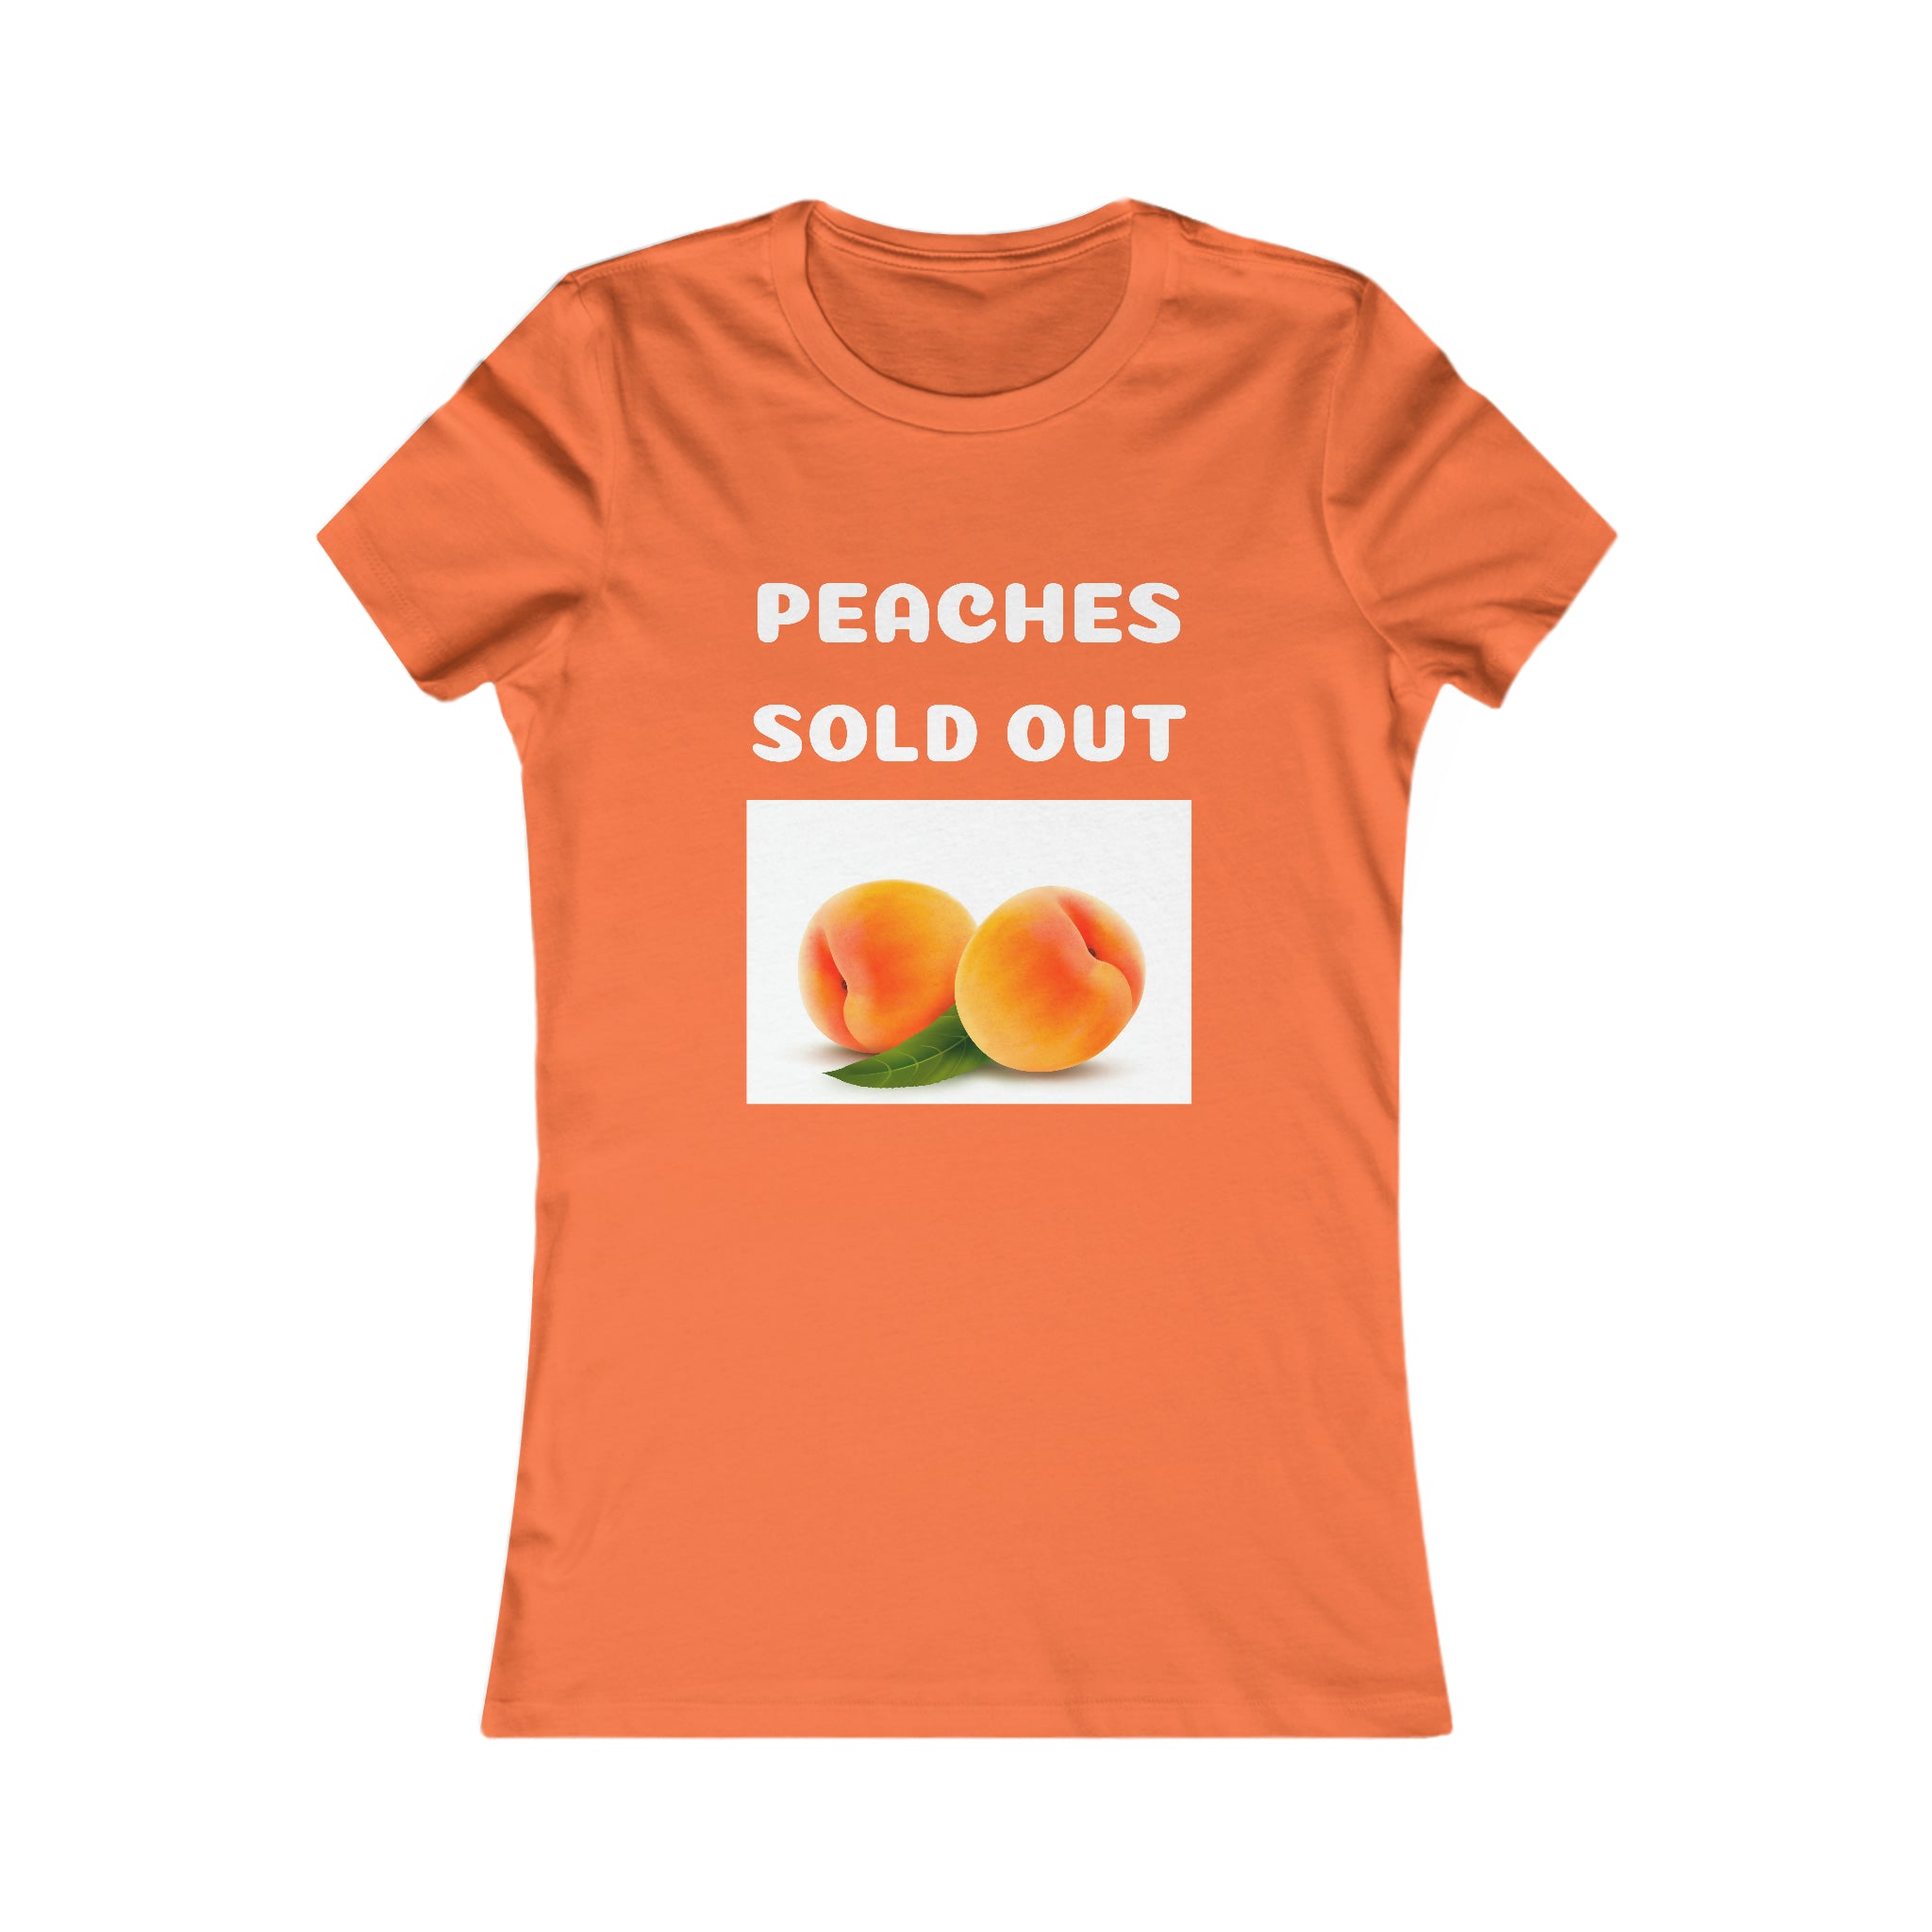 PEACHES SOLD OUT – JRS3 MUSIC FASHION